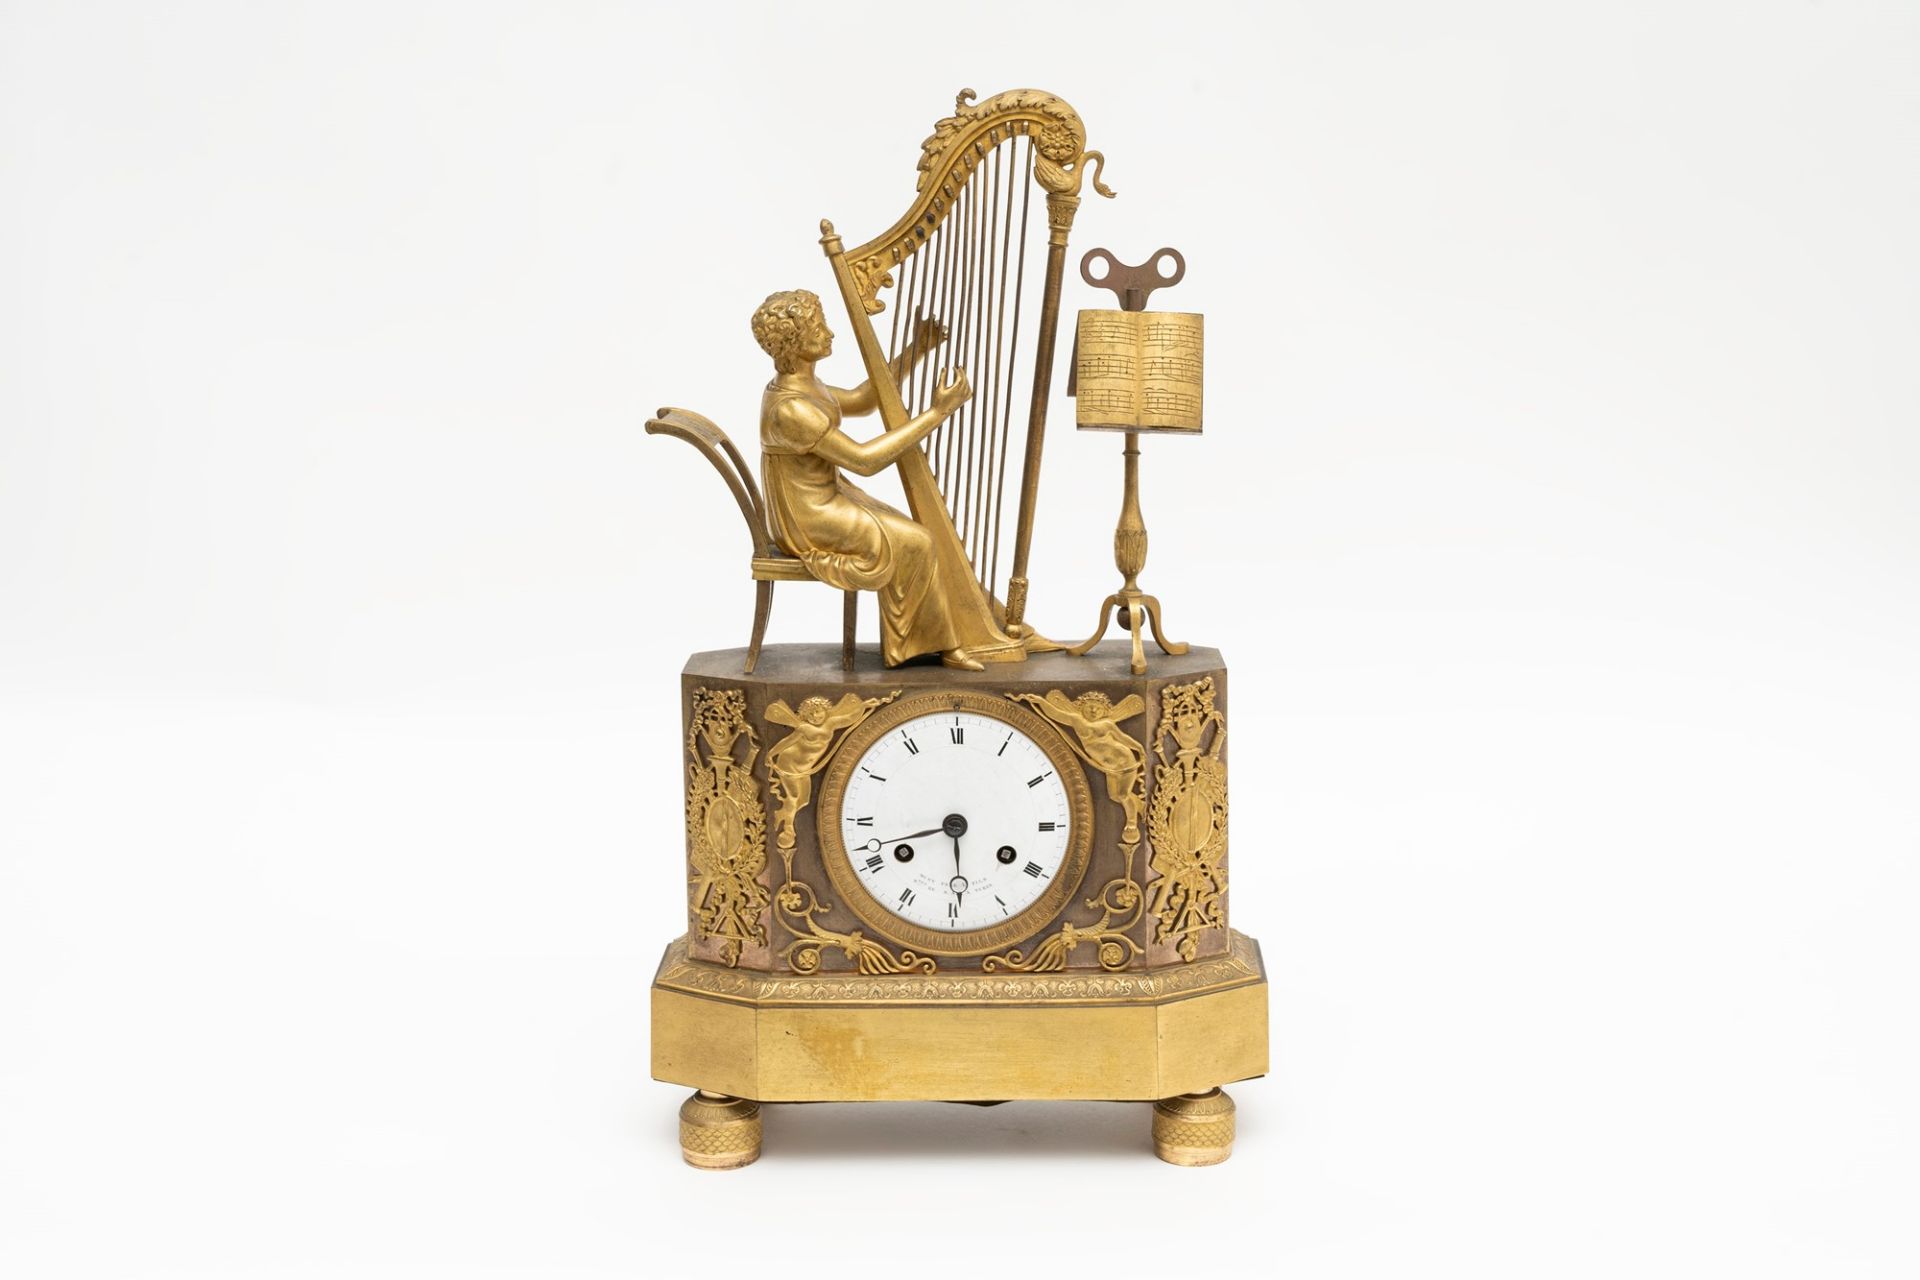 Empire clock in gilded bronze with girl playing the harp, early 19th century